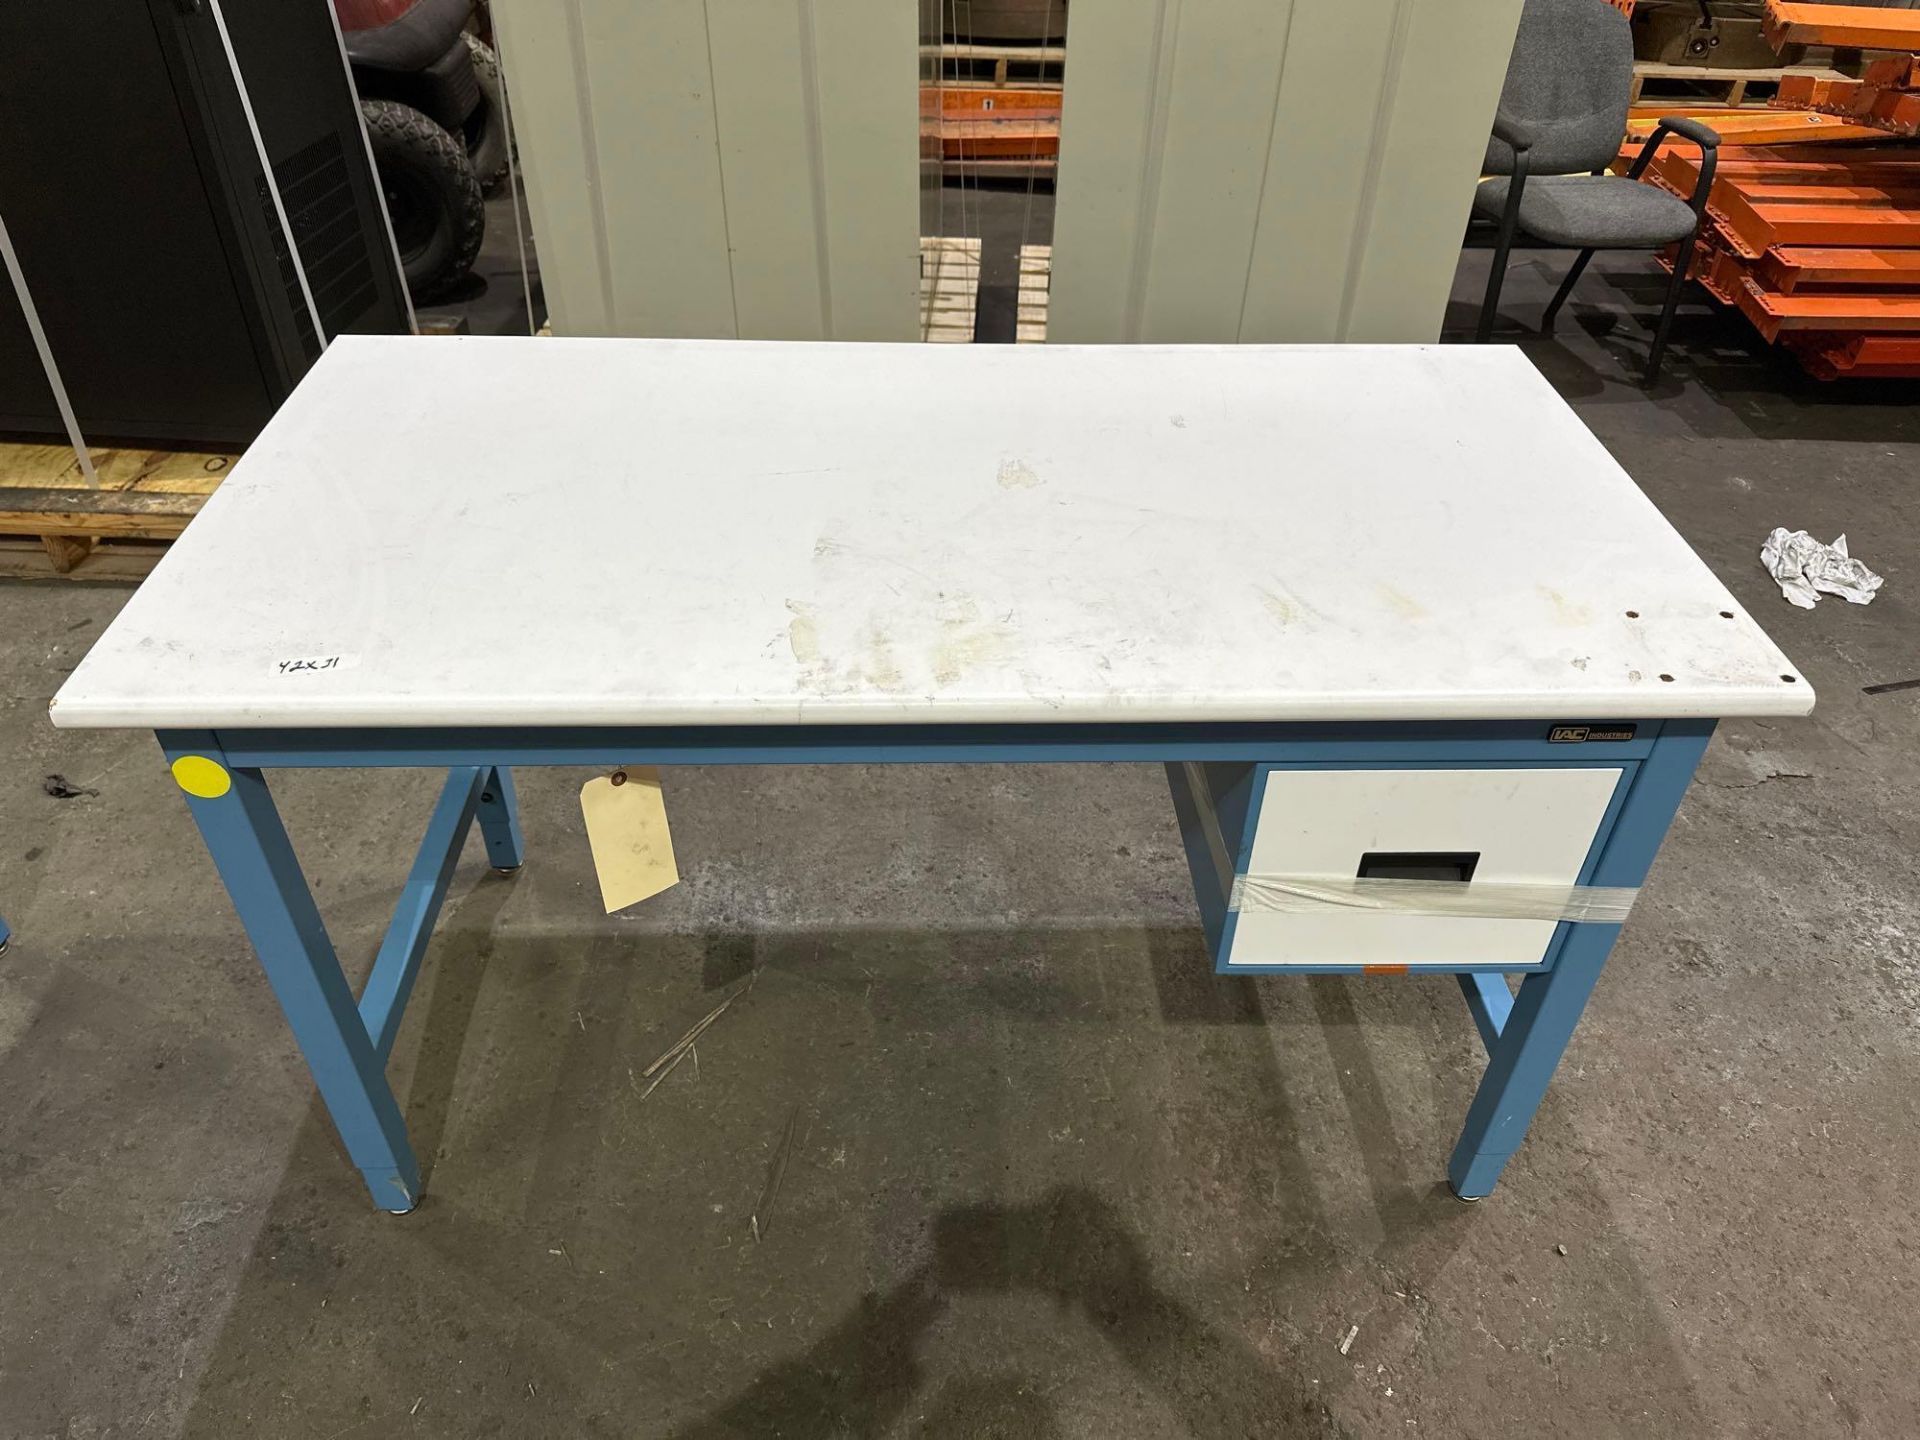 IAC Industries WorkStation Table W/1 Drawer, 500 Lb Capacity 60”L x 30”W x 34”H. See photo. - Image 4 of 4